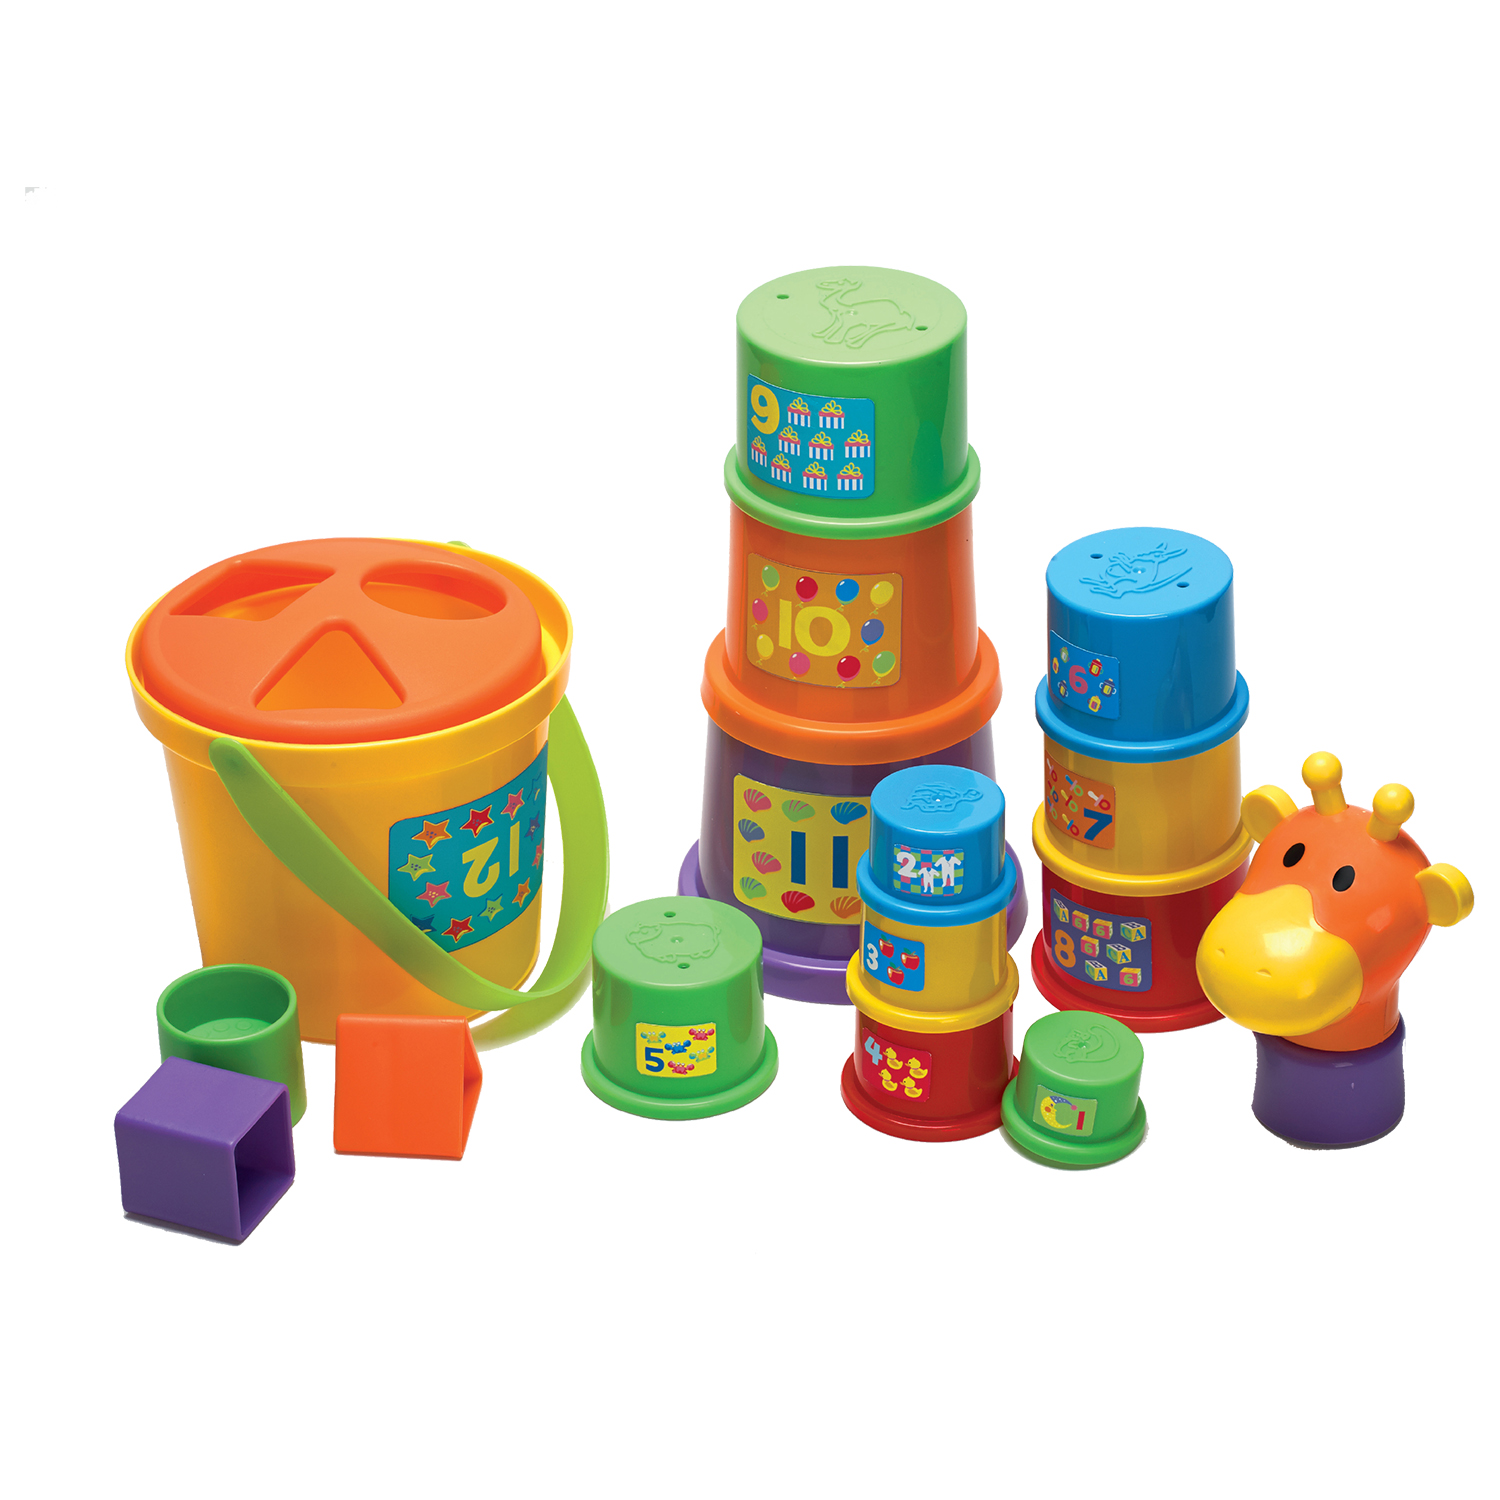 Play Right Jumbo Stacking Cups and Sorter months NEW Giraffe for ages 12 